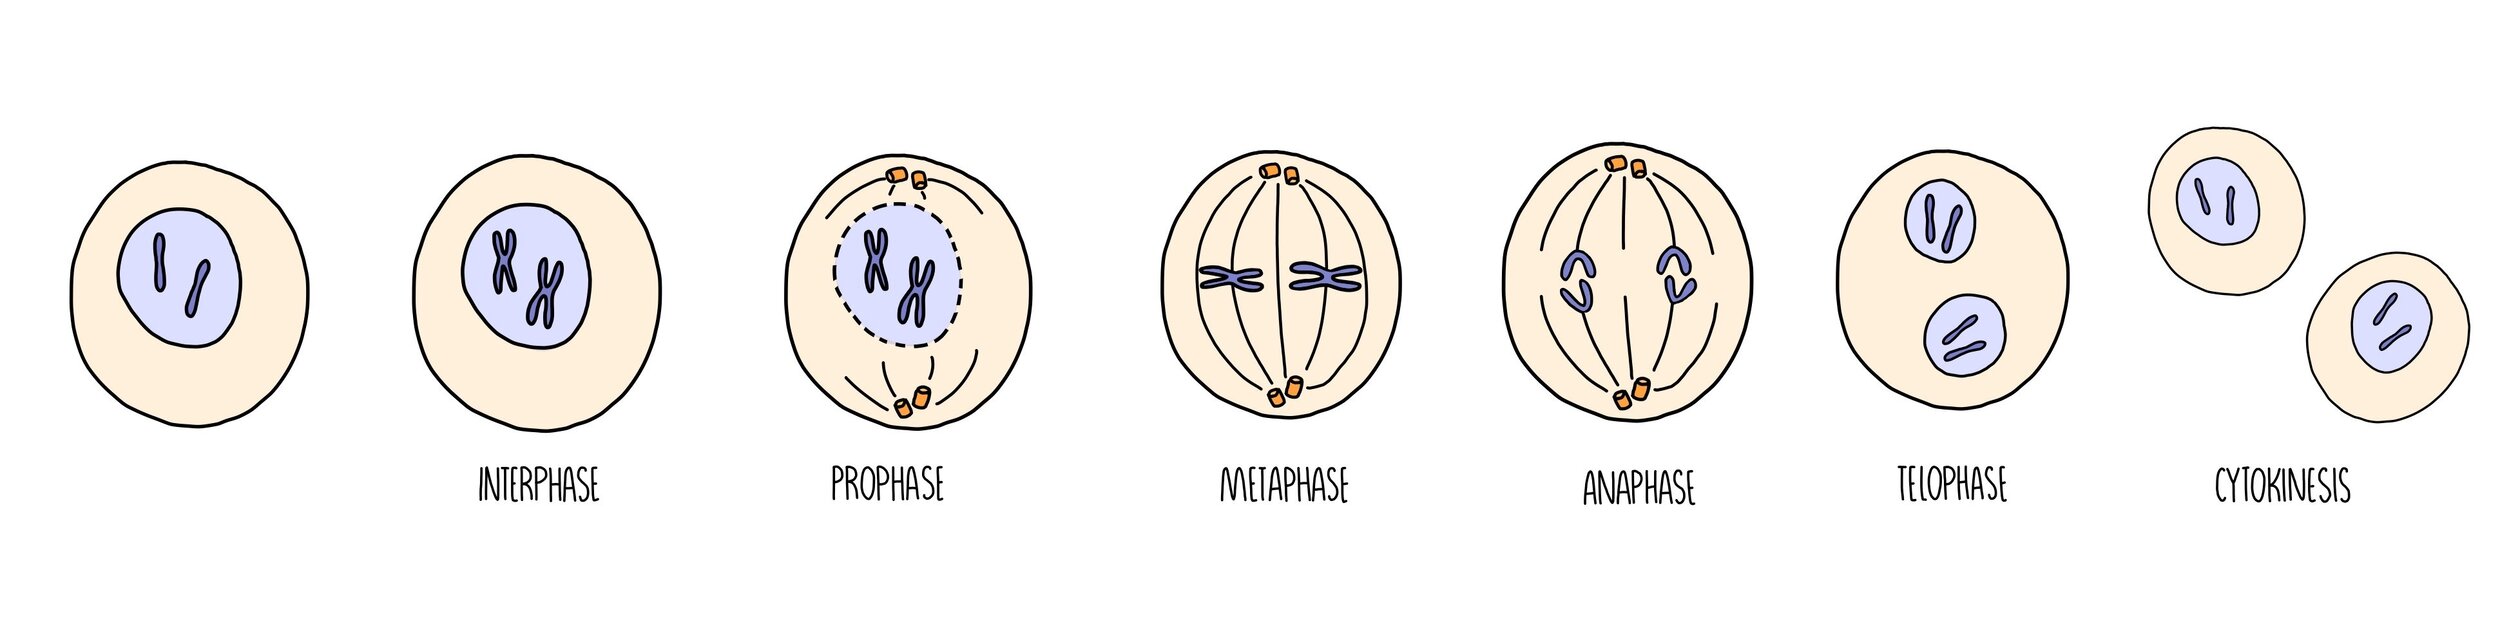 Stages meiosis